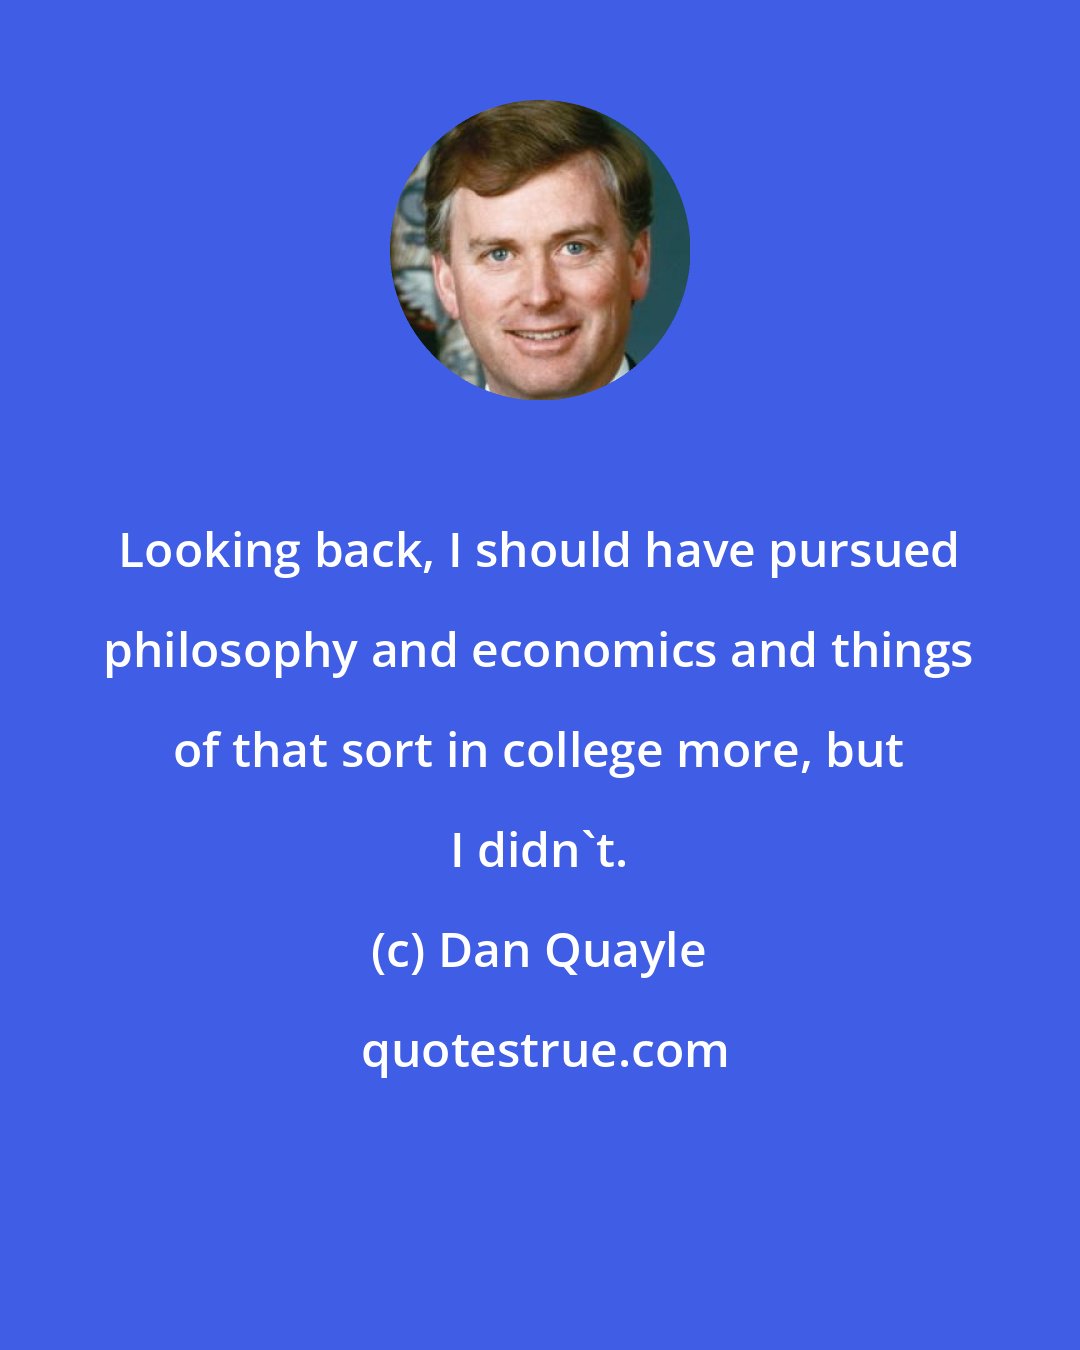 Dan Quayle: Looking back, I should have pursued philosophy and economics and things of that sort in college more, but I didn't.